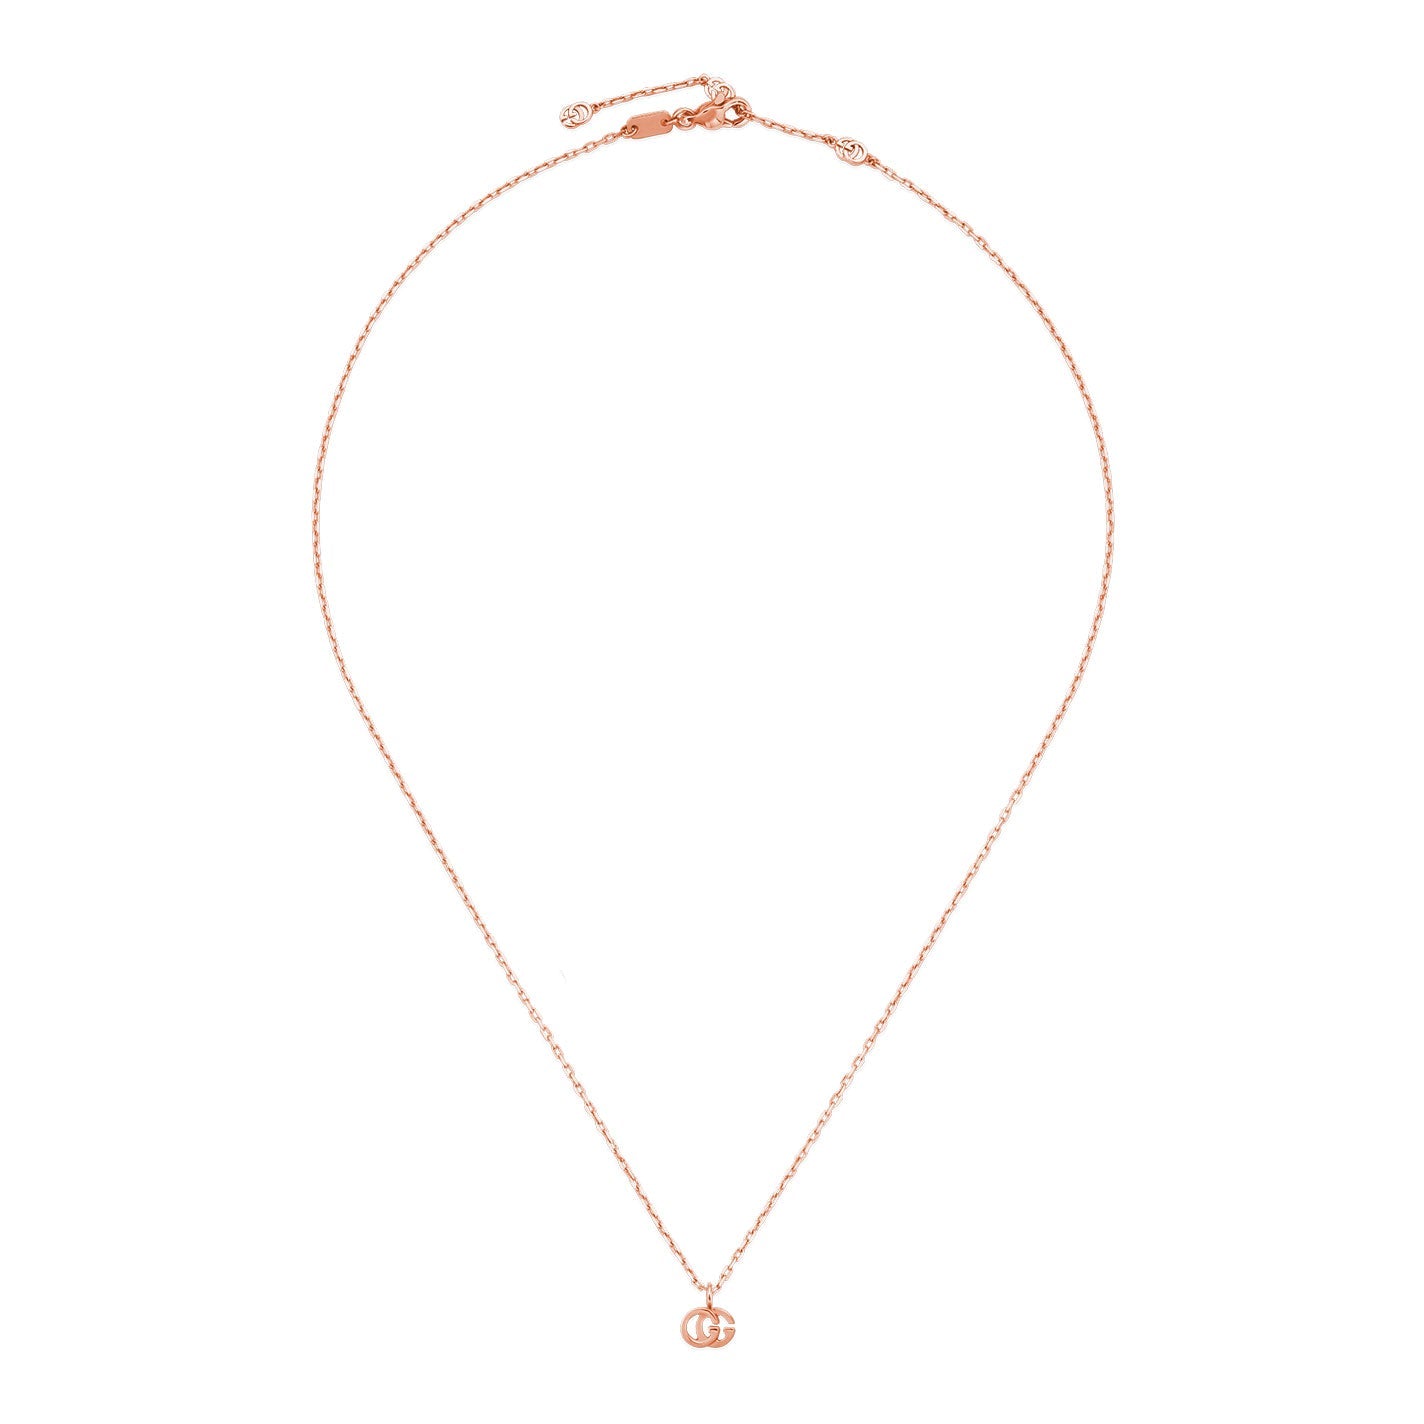 Gucci GG Running 18K Rose Gold Necklace Pendant